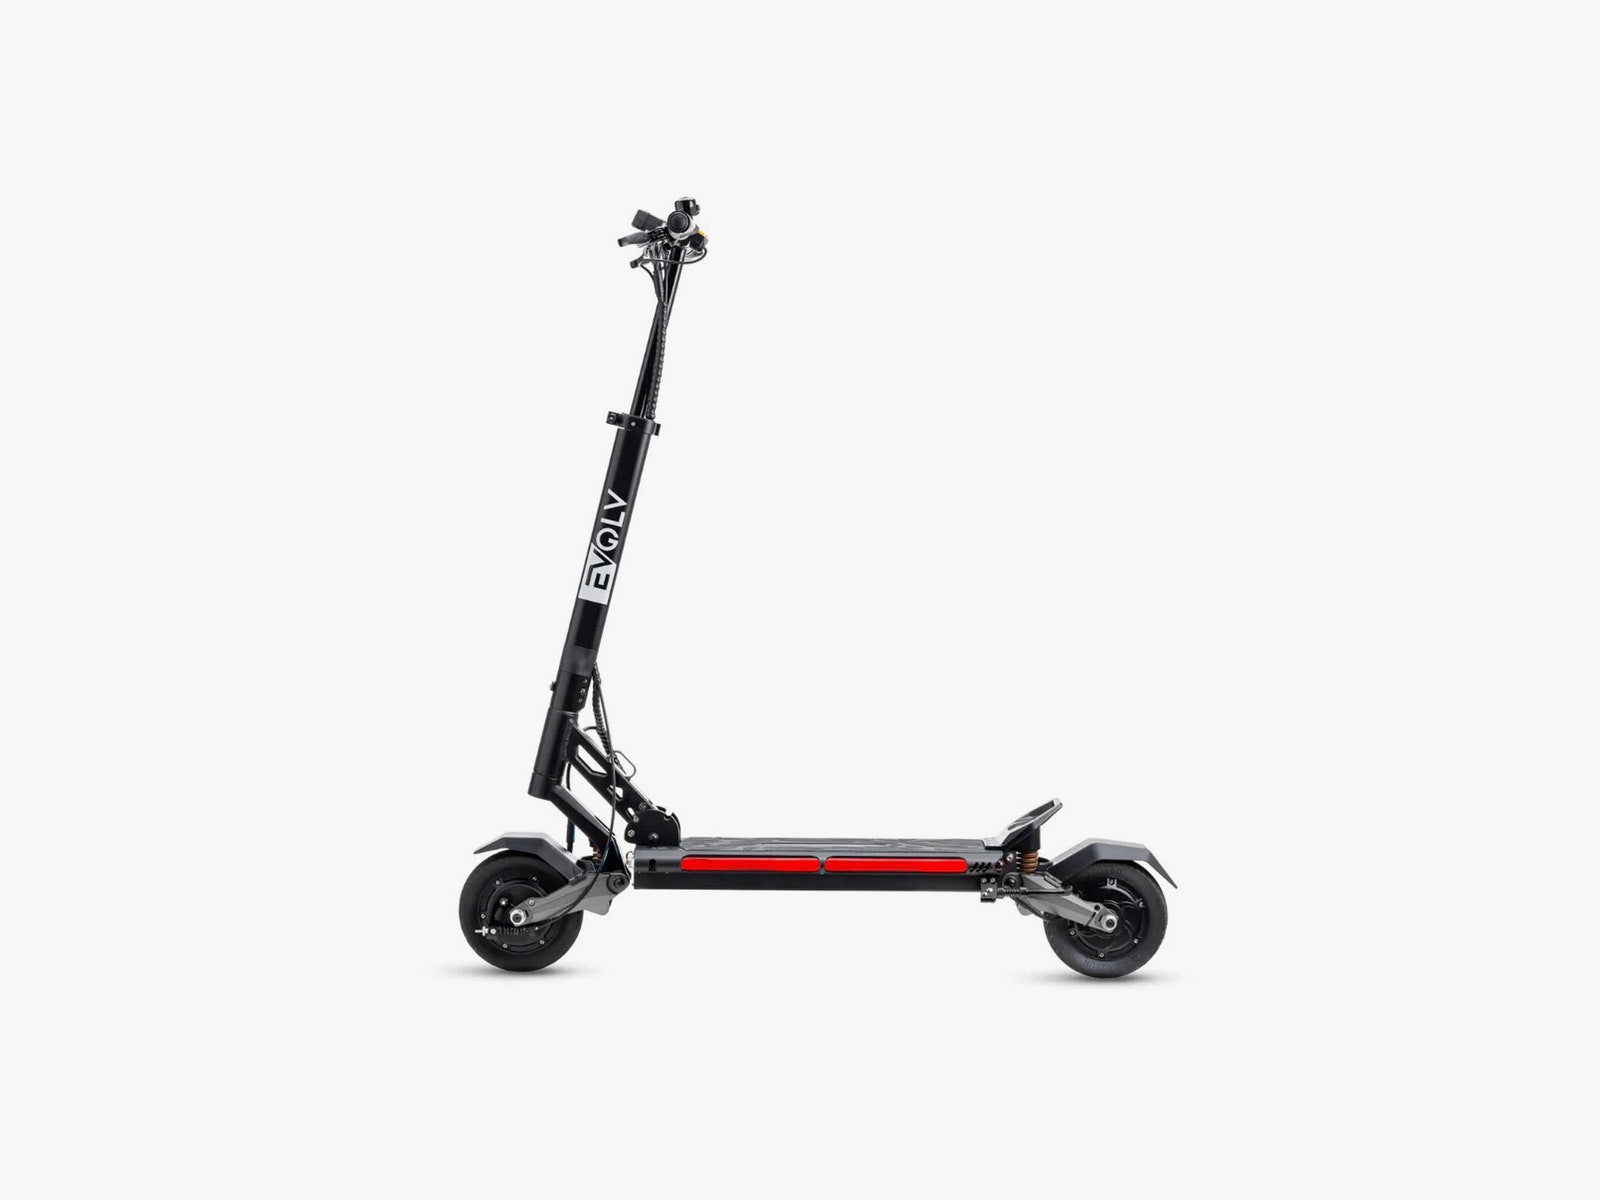 Side view of the Evolv Terra electric scooter